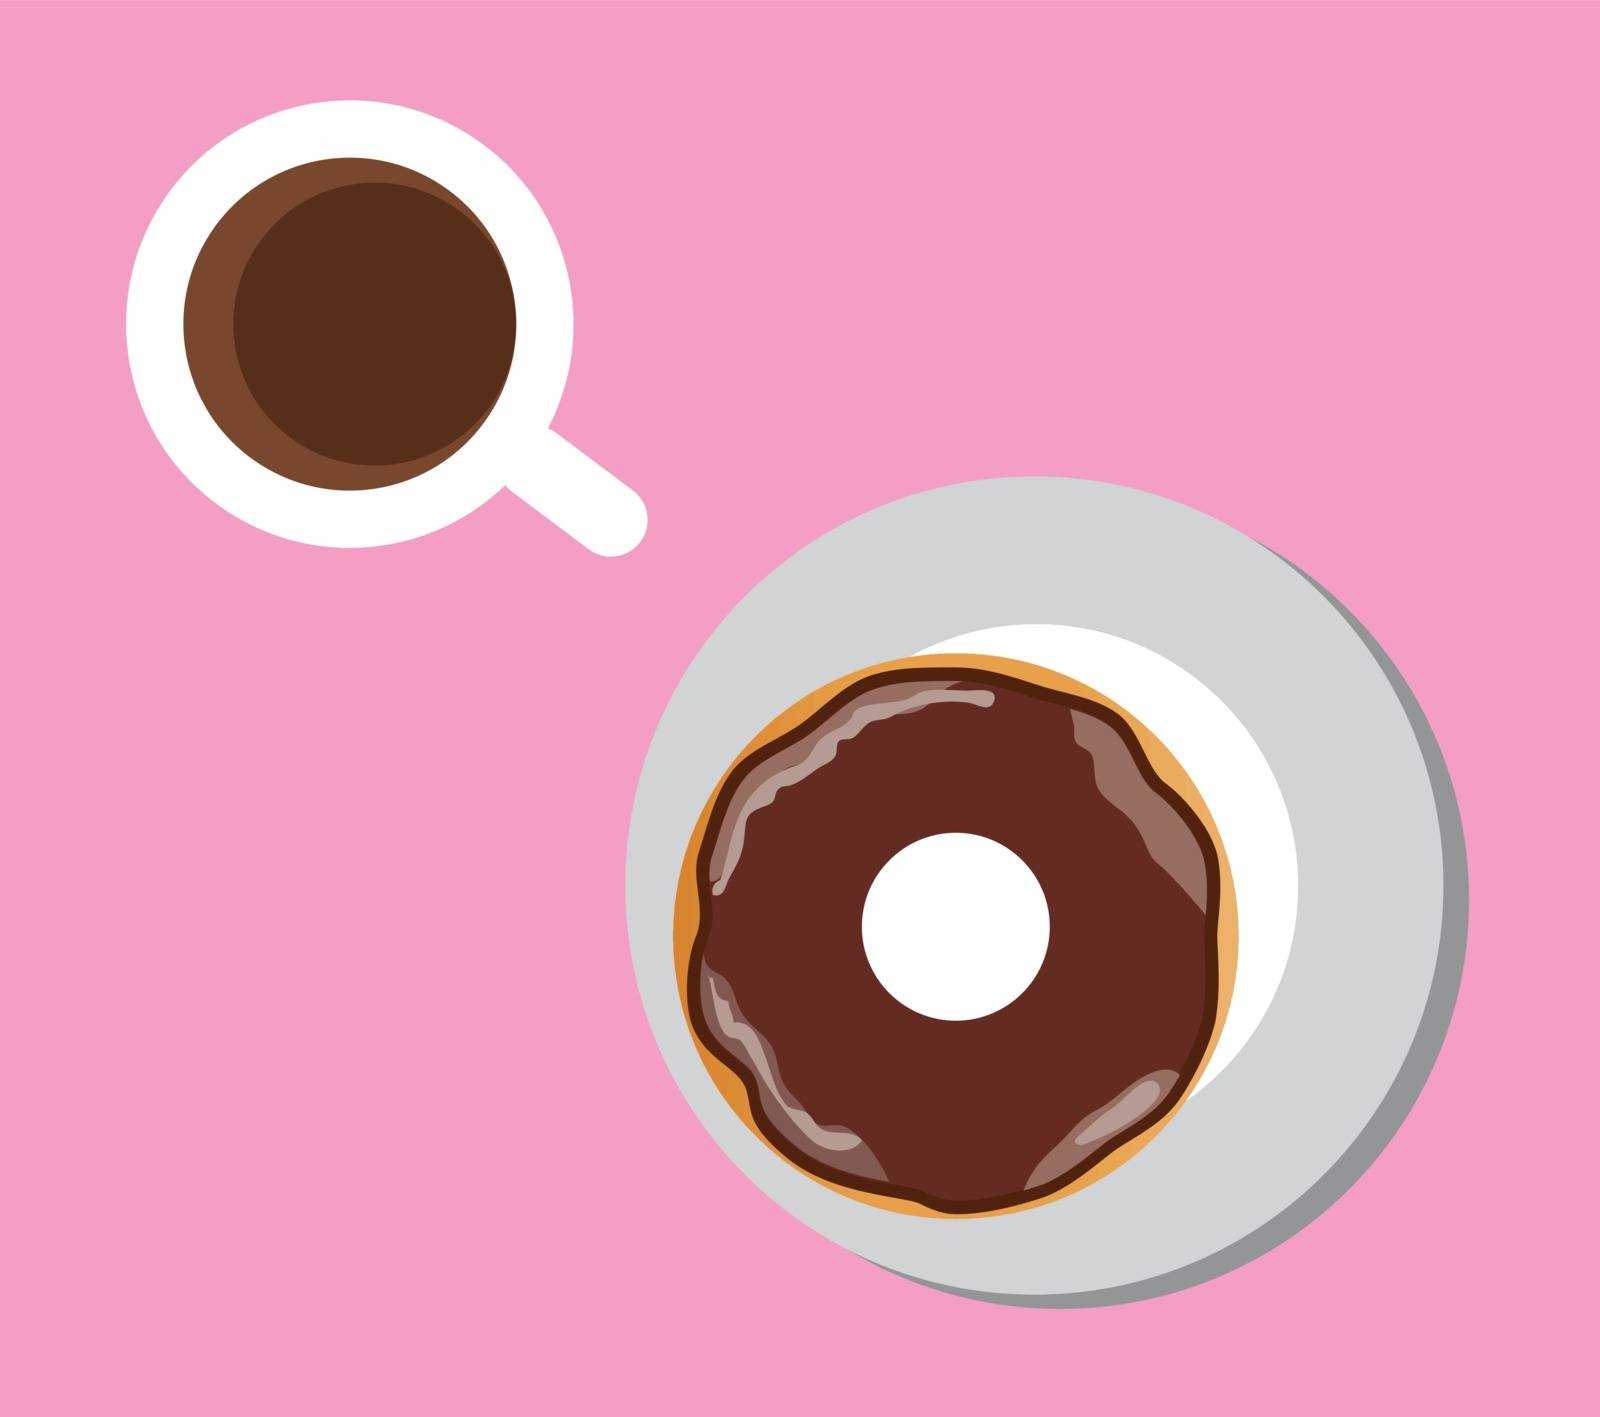 vector illustration of cup of coffee and donut. breakfast background